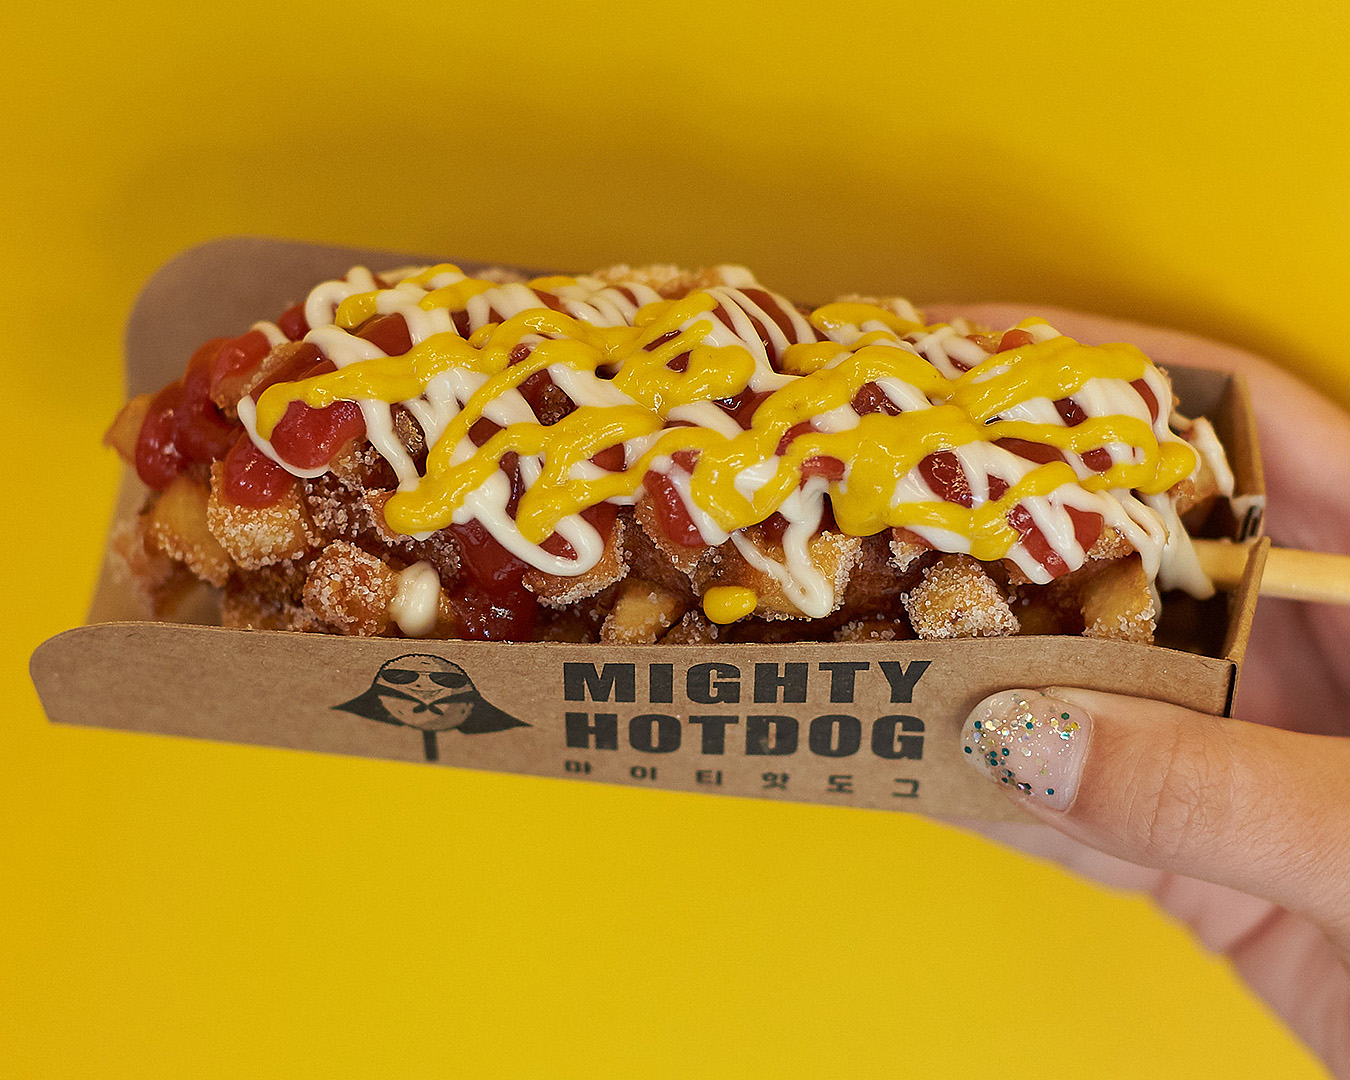 Heaping sauce onto your Mighty Hotdog is a right of passage on Auckland's cheap eats scene.